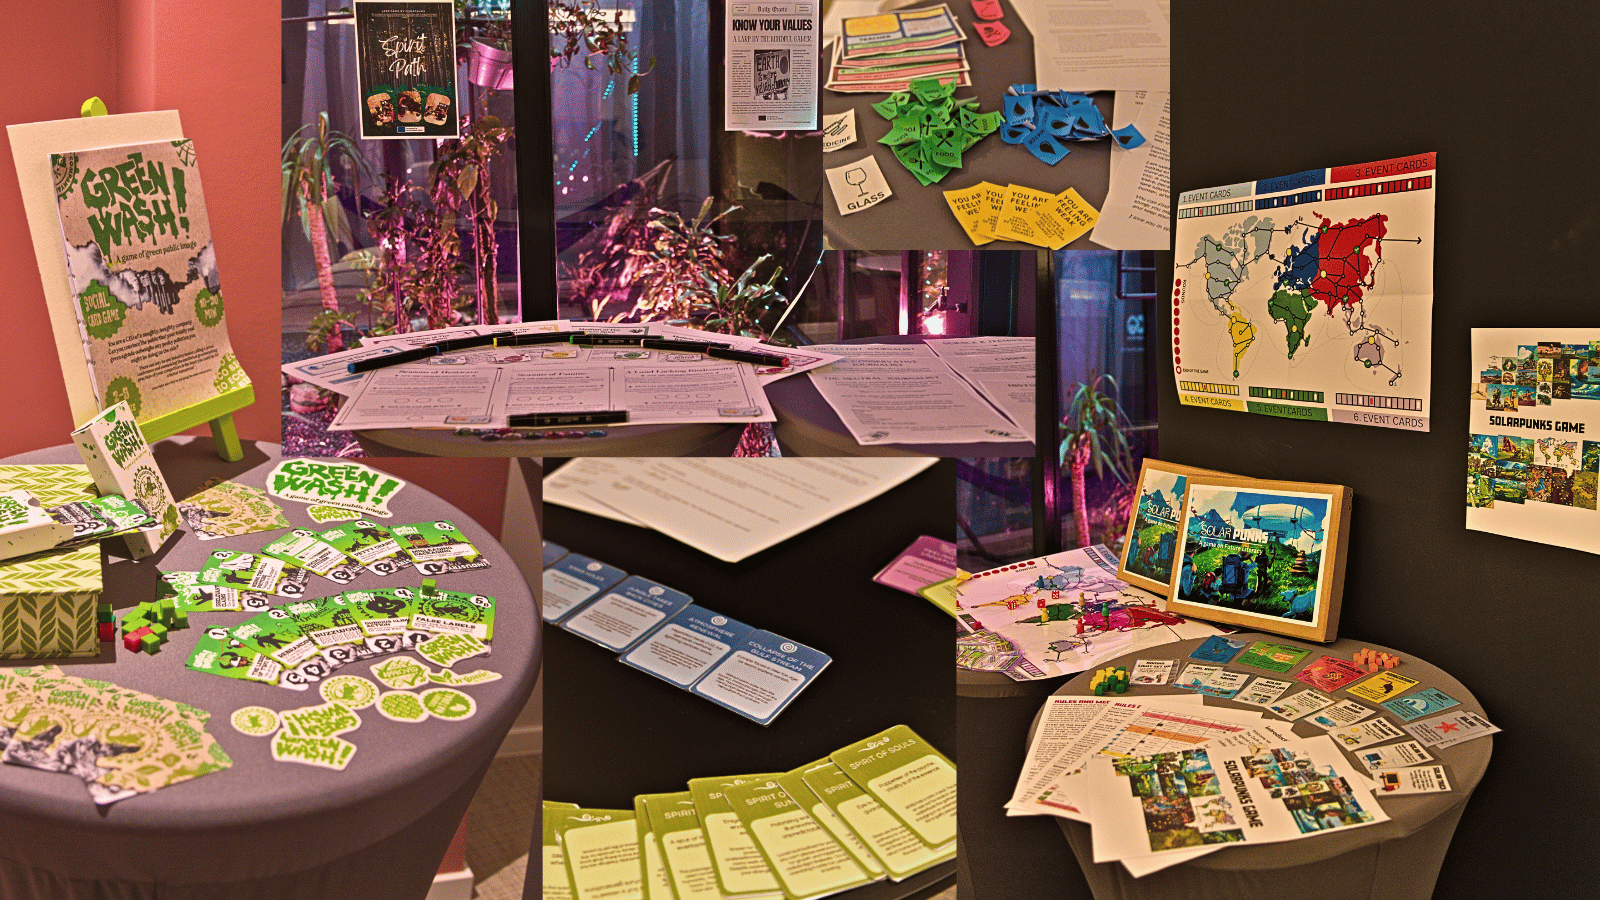 Photos of games from the Climate for All project from a public presentation. You can see a variety of cards, game tokens, maps, game manuals, and more, from 6 games